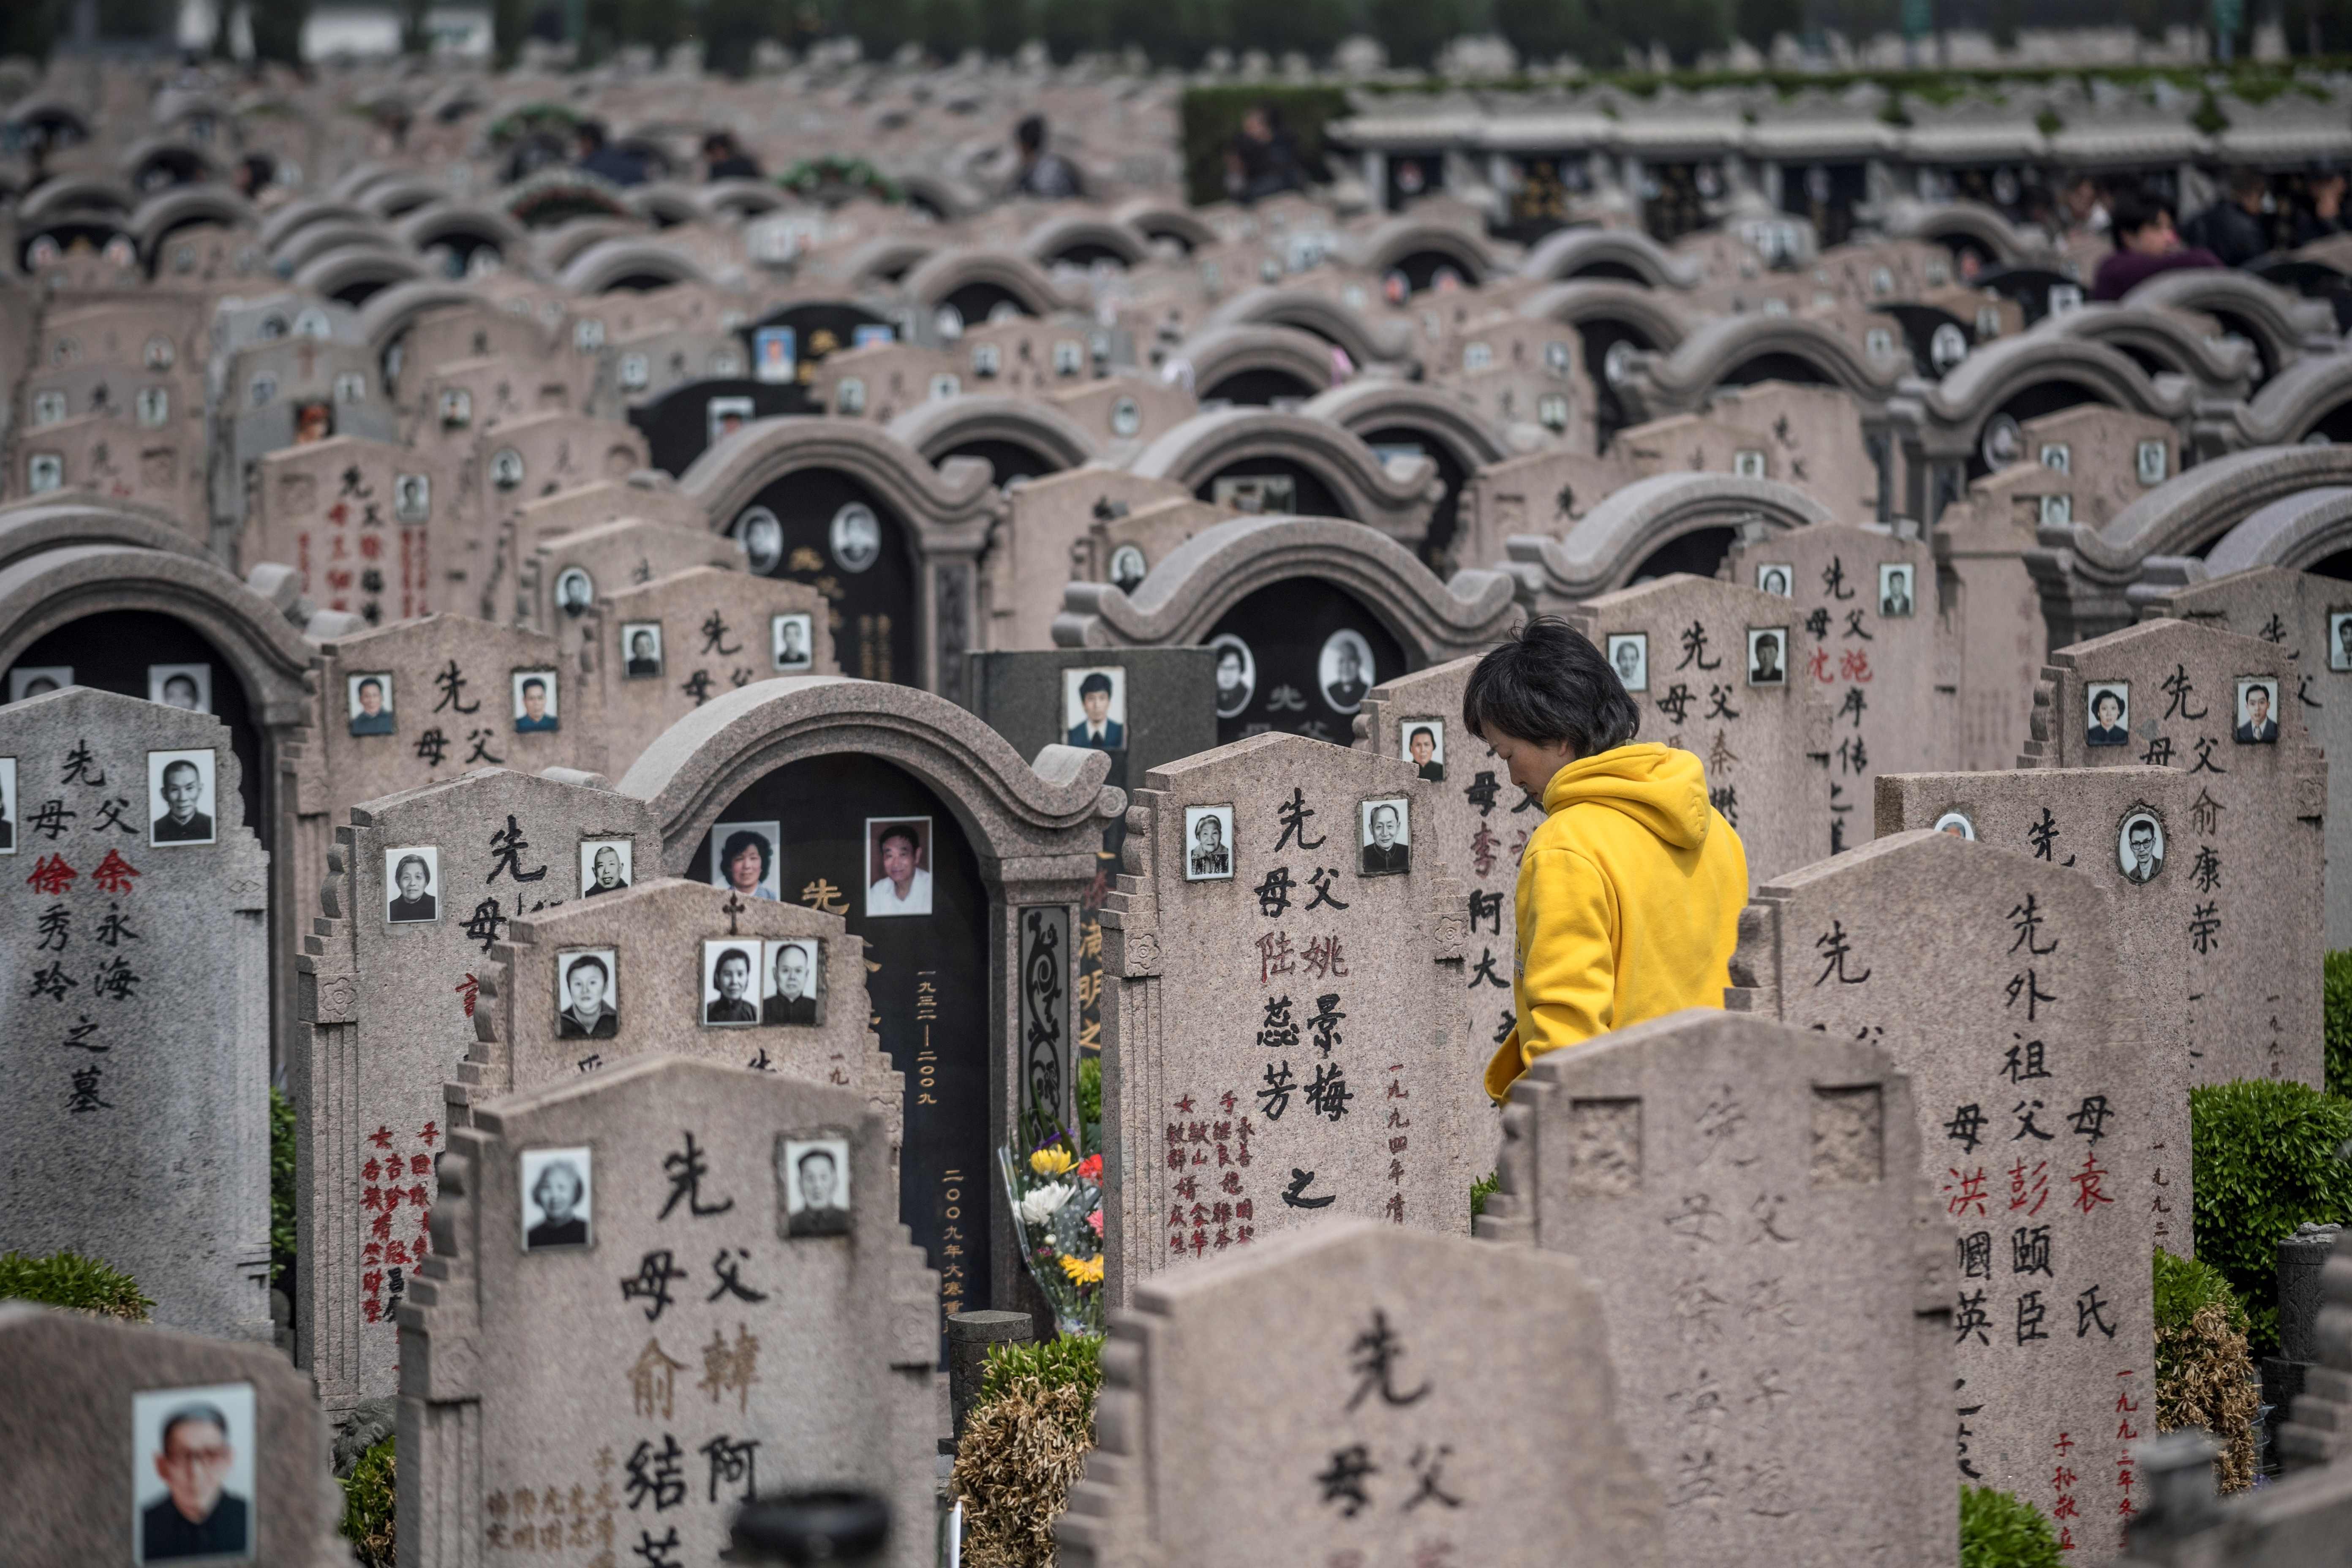 A woman pays her respects to the deceased during the Ching Ming (or Qing Ming) festival last Friday, at a cemetery in Shanghai. It is customary for Chinese people to tend to the graves of their departed loved ones during Ching Ming. Photo: AFP